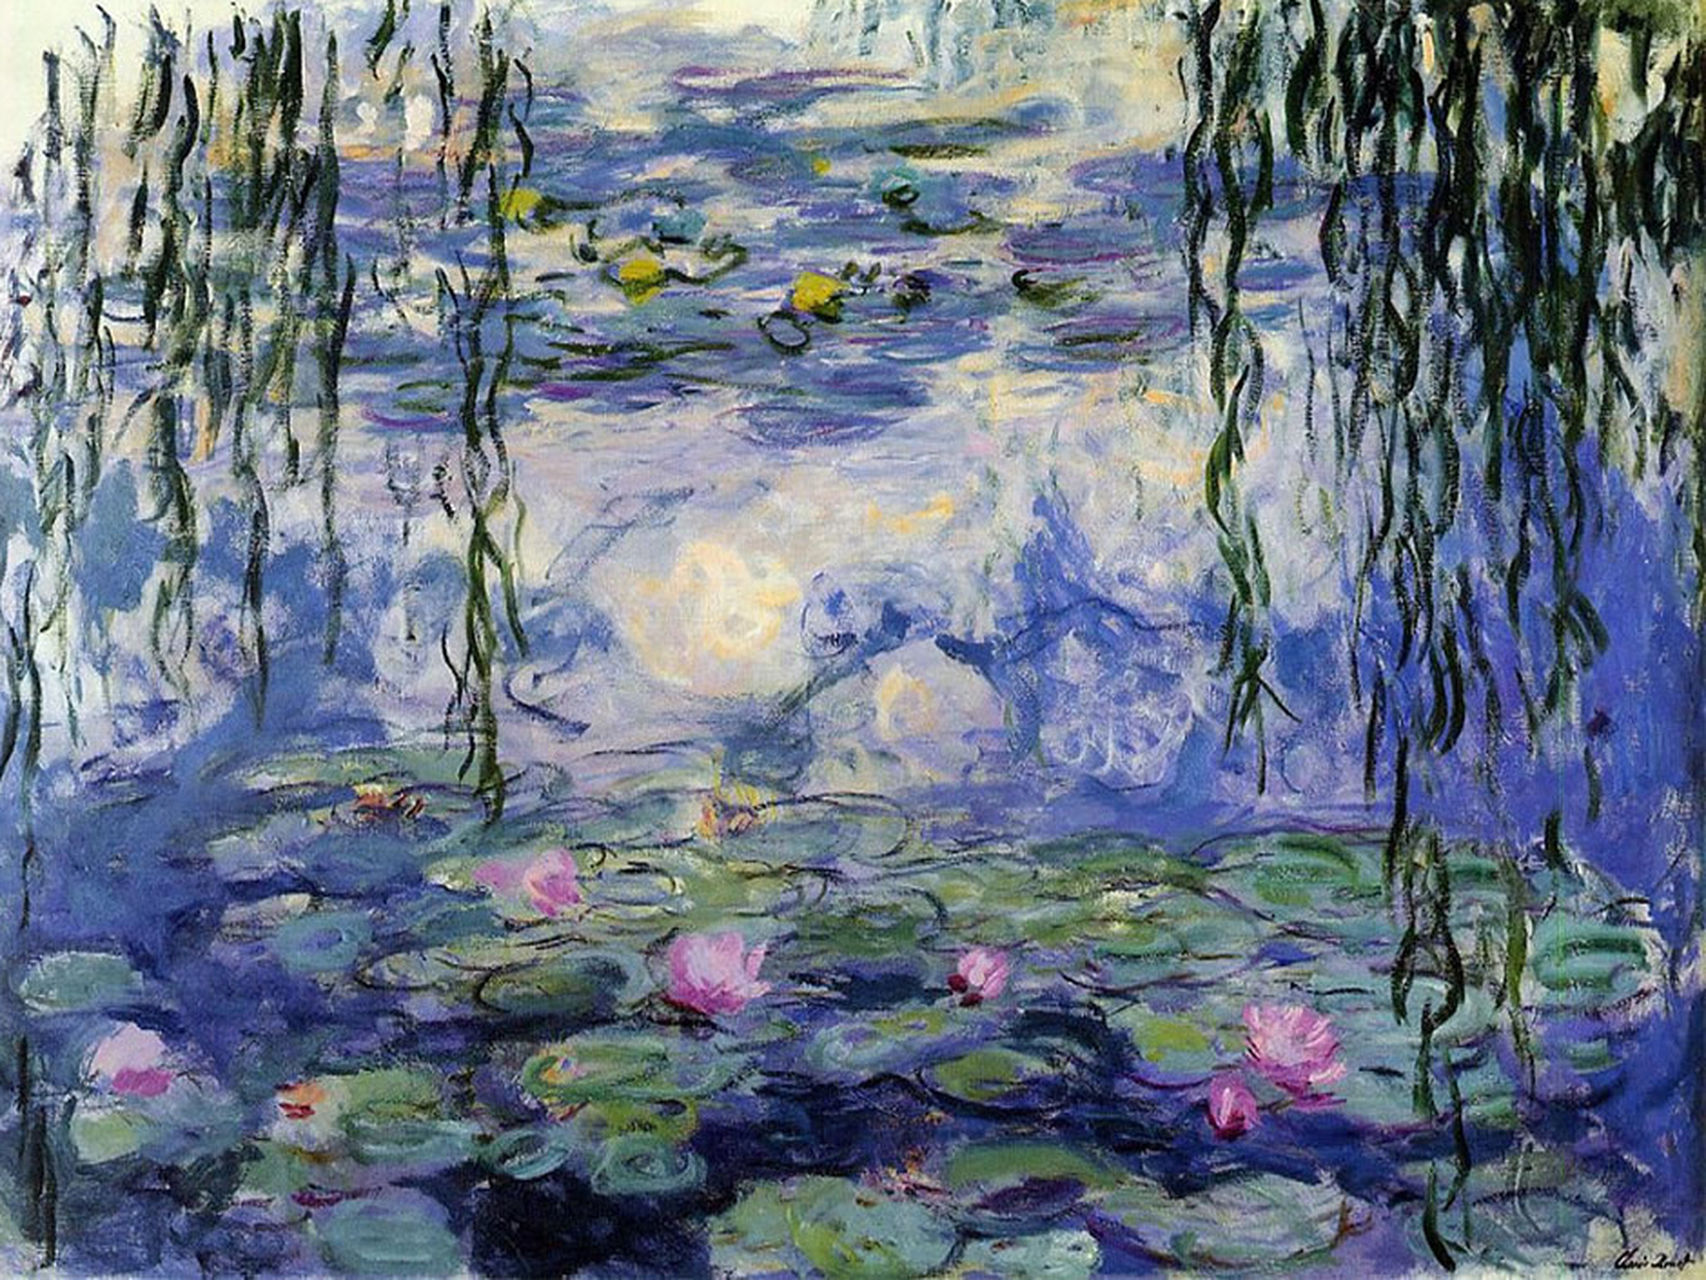 Water Lilies" by Monet